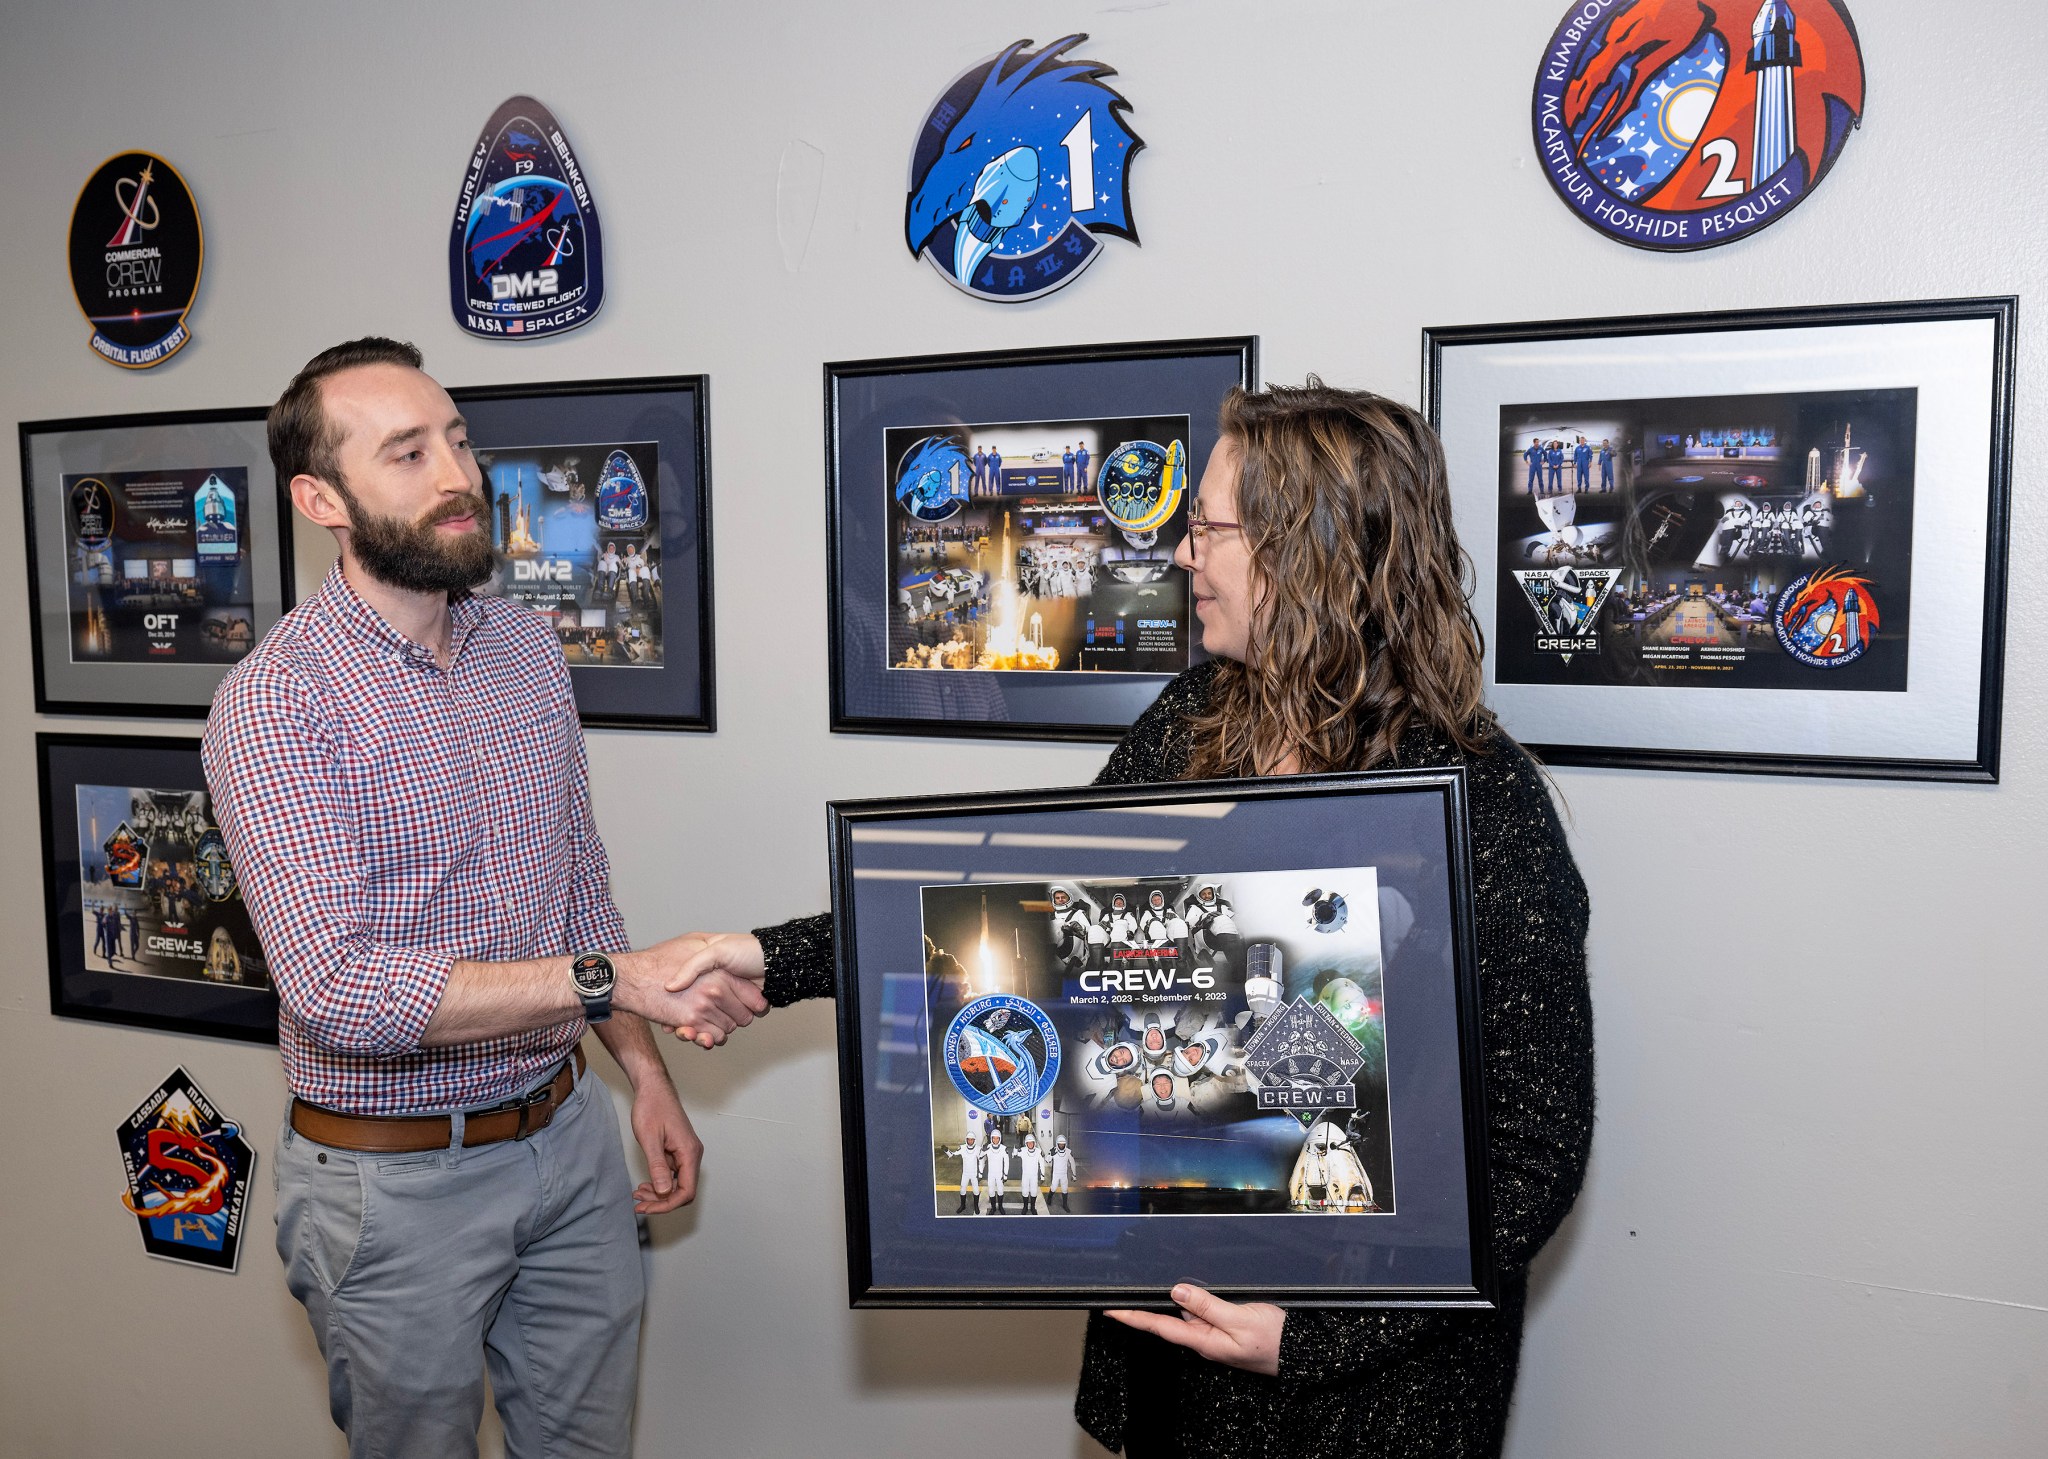 Jonathan Carman, left, deputy SpaceX Falcon 9 lead engineer, shakes hands with McCollum before he hangs the Crew-6 mission plaque.